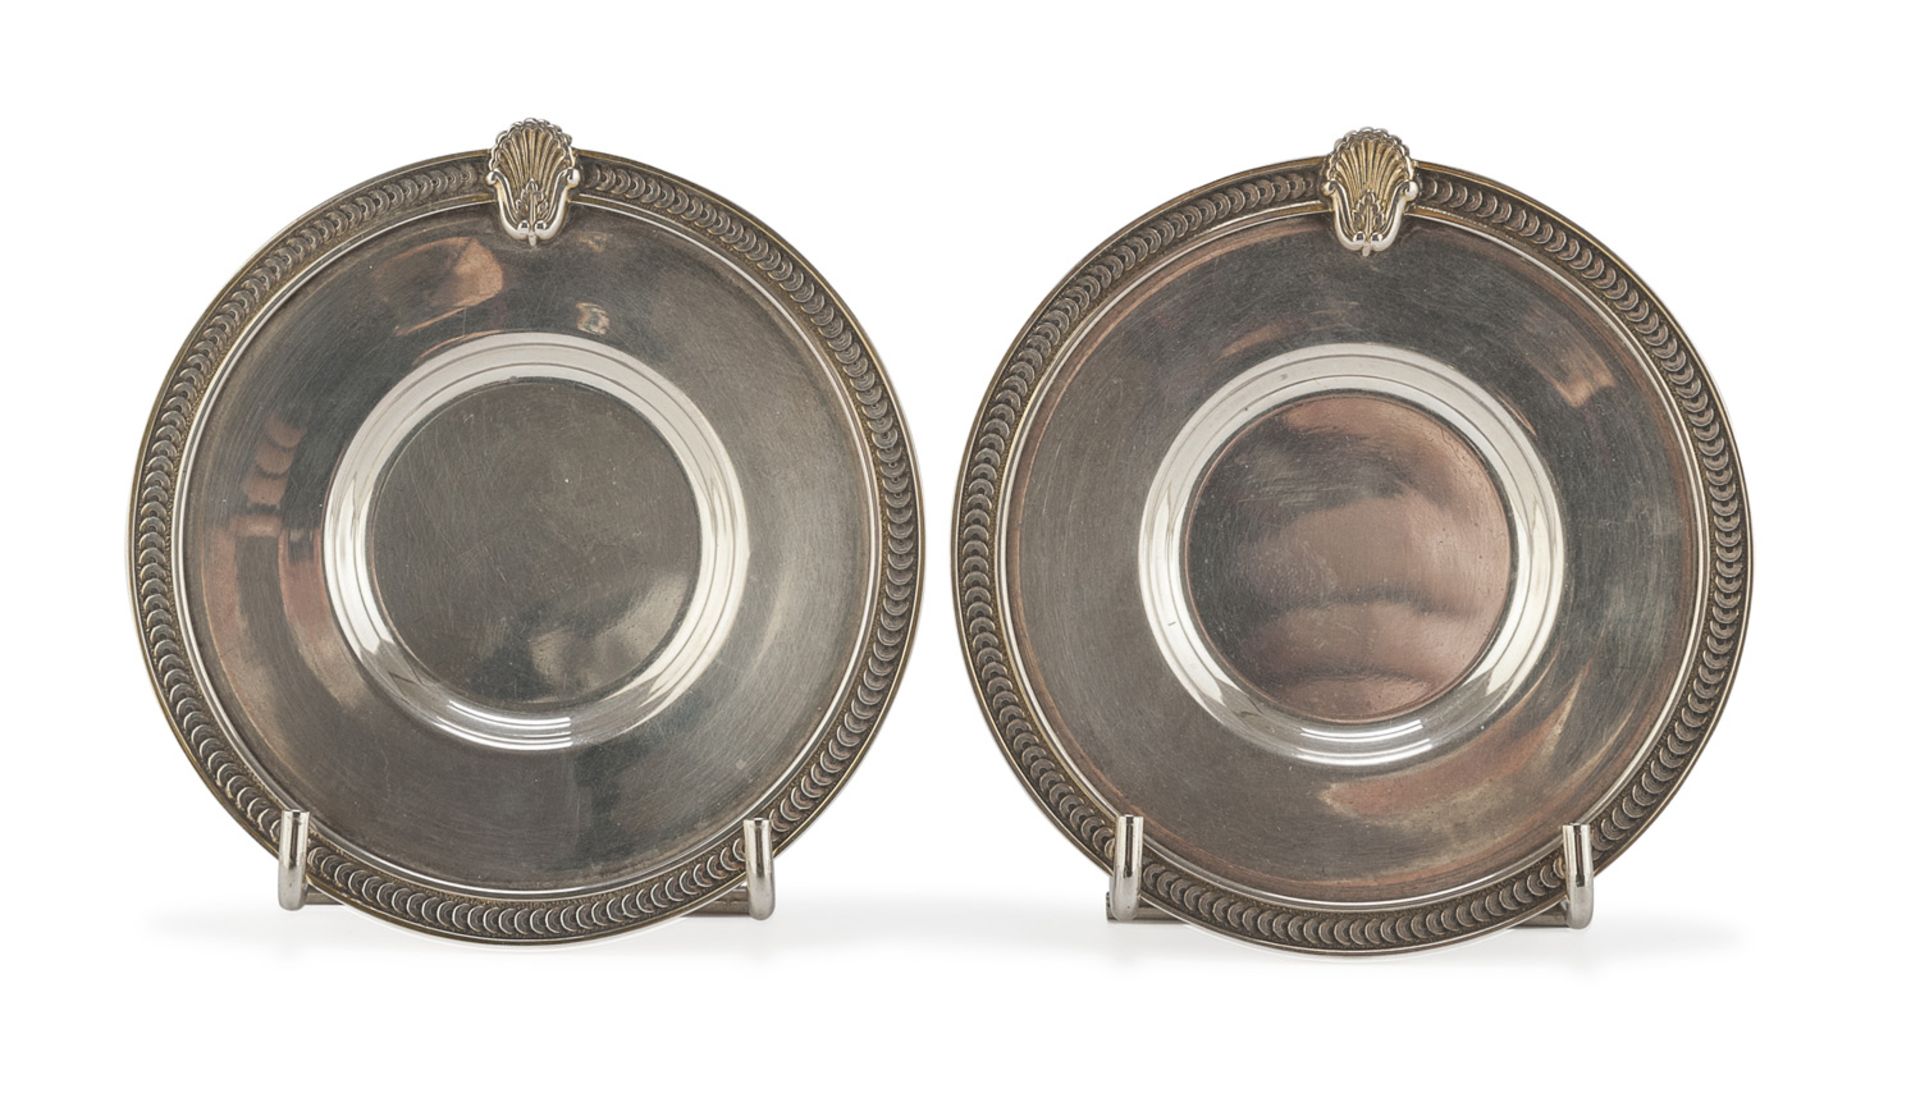 PAIR OF SILVER SAUCERS STEFANI BOLOGNA POST 1968